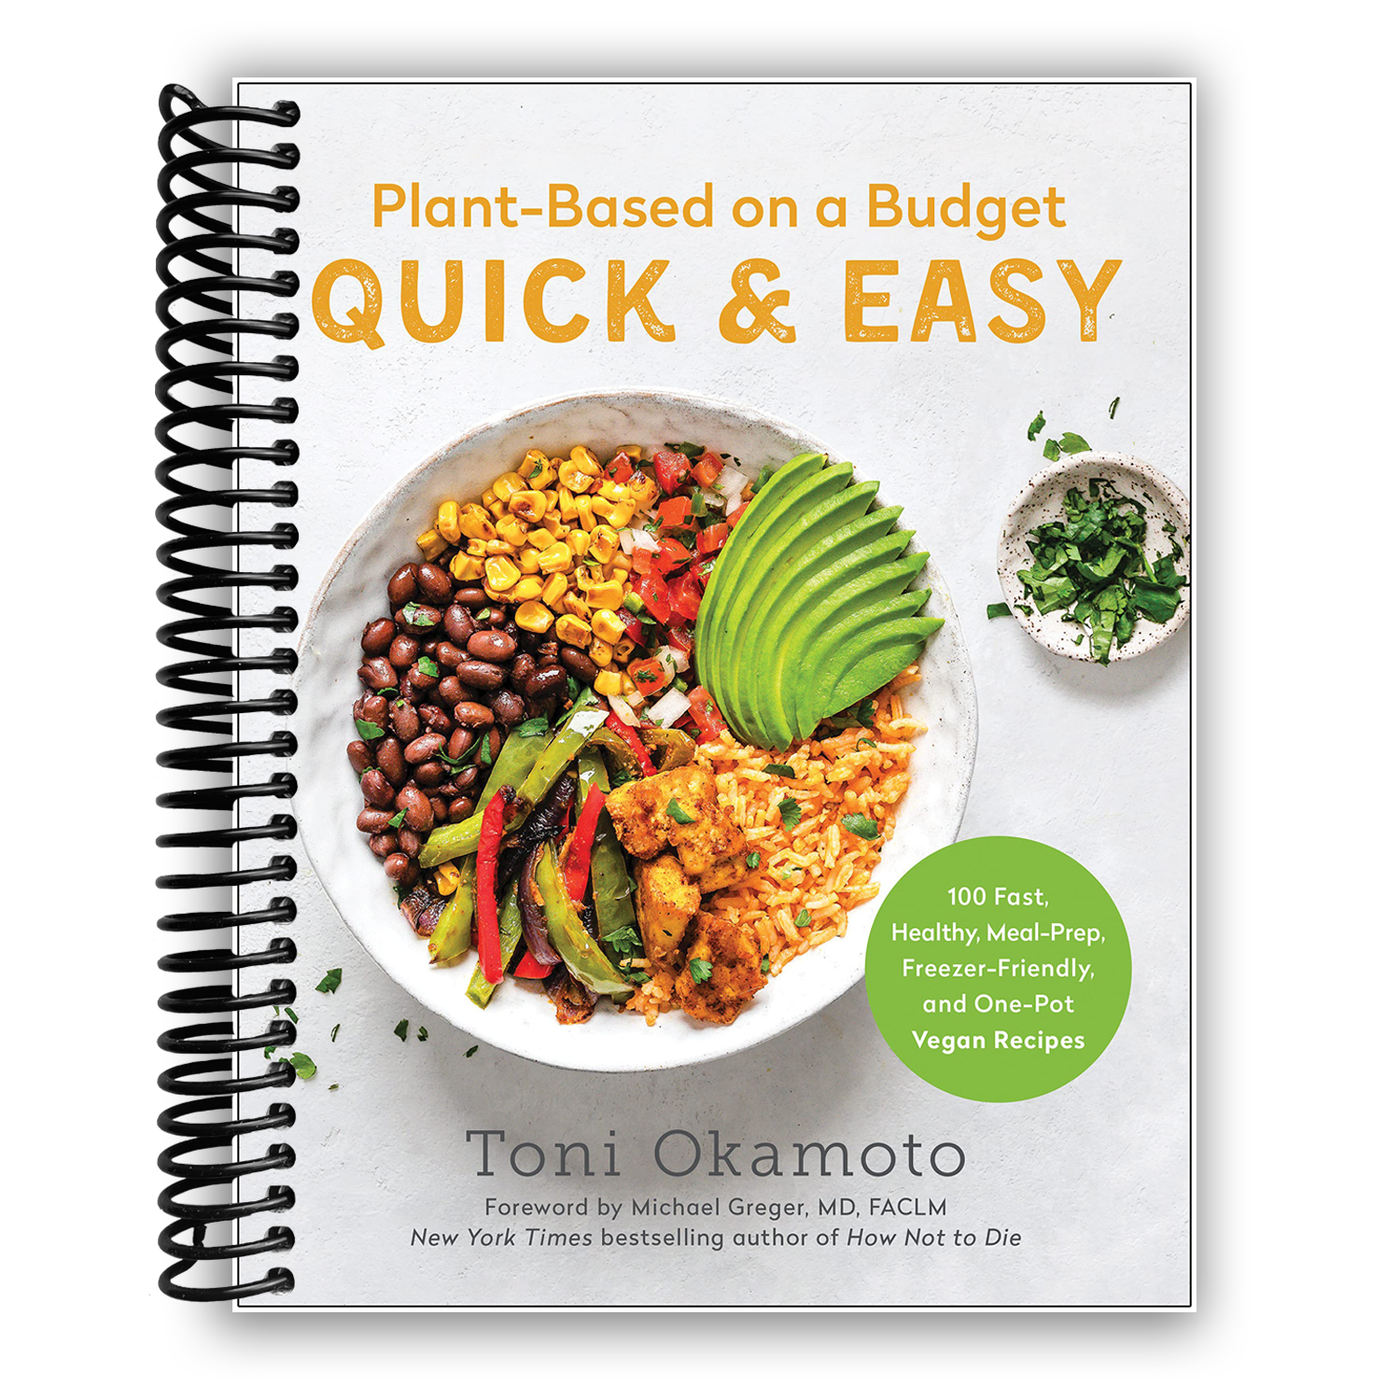 Plant-Based on a Budget Quick & Easy: 100 Fast, Healthy, Meal-Prep, Freezer-Friendly, and One-Pot Vegan Recipes (Spiral Bound)